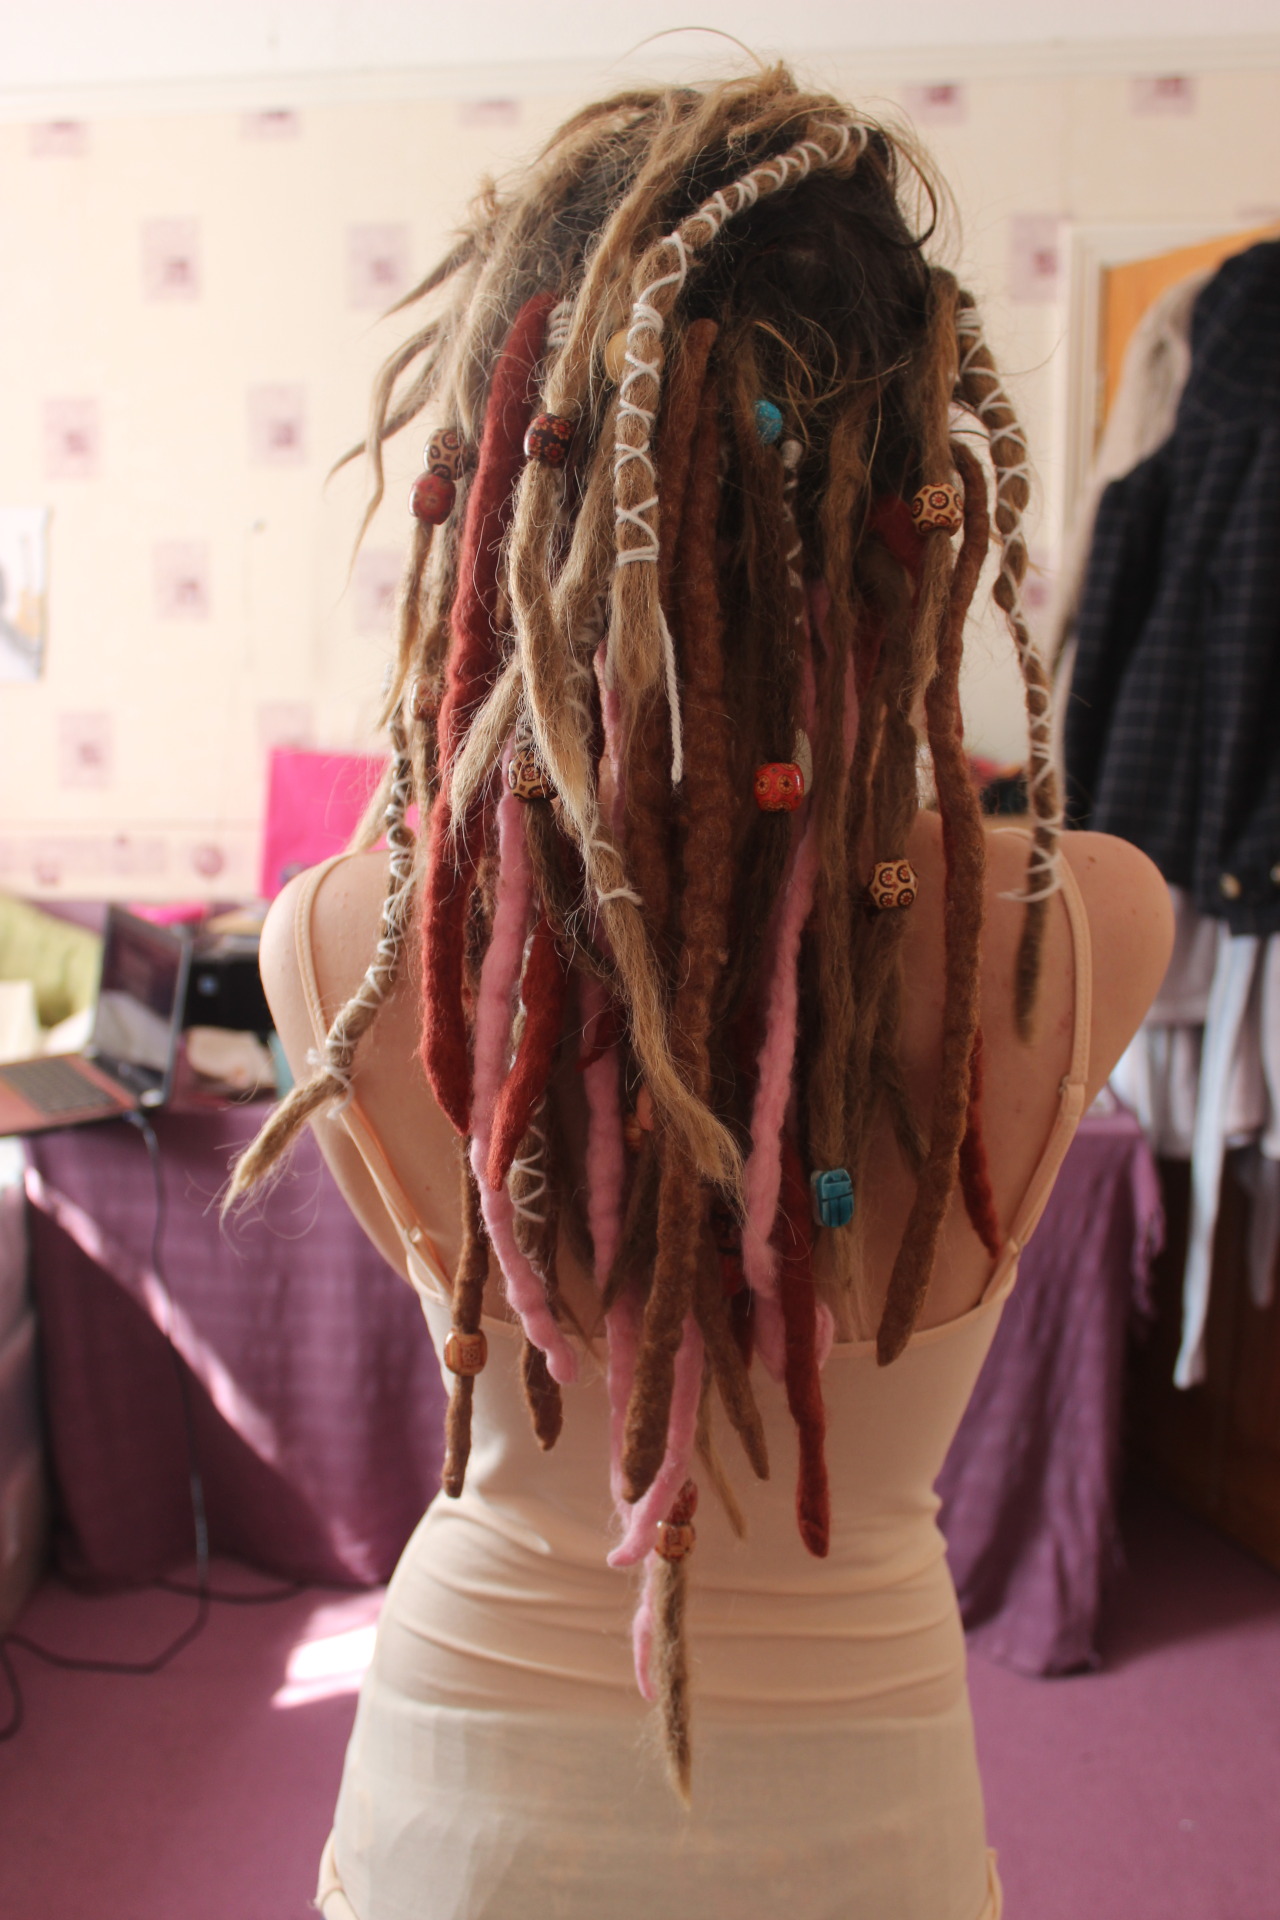 significance-unknown:  dreadlockinfo:  My names Amy and my locks are about 6 months